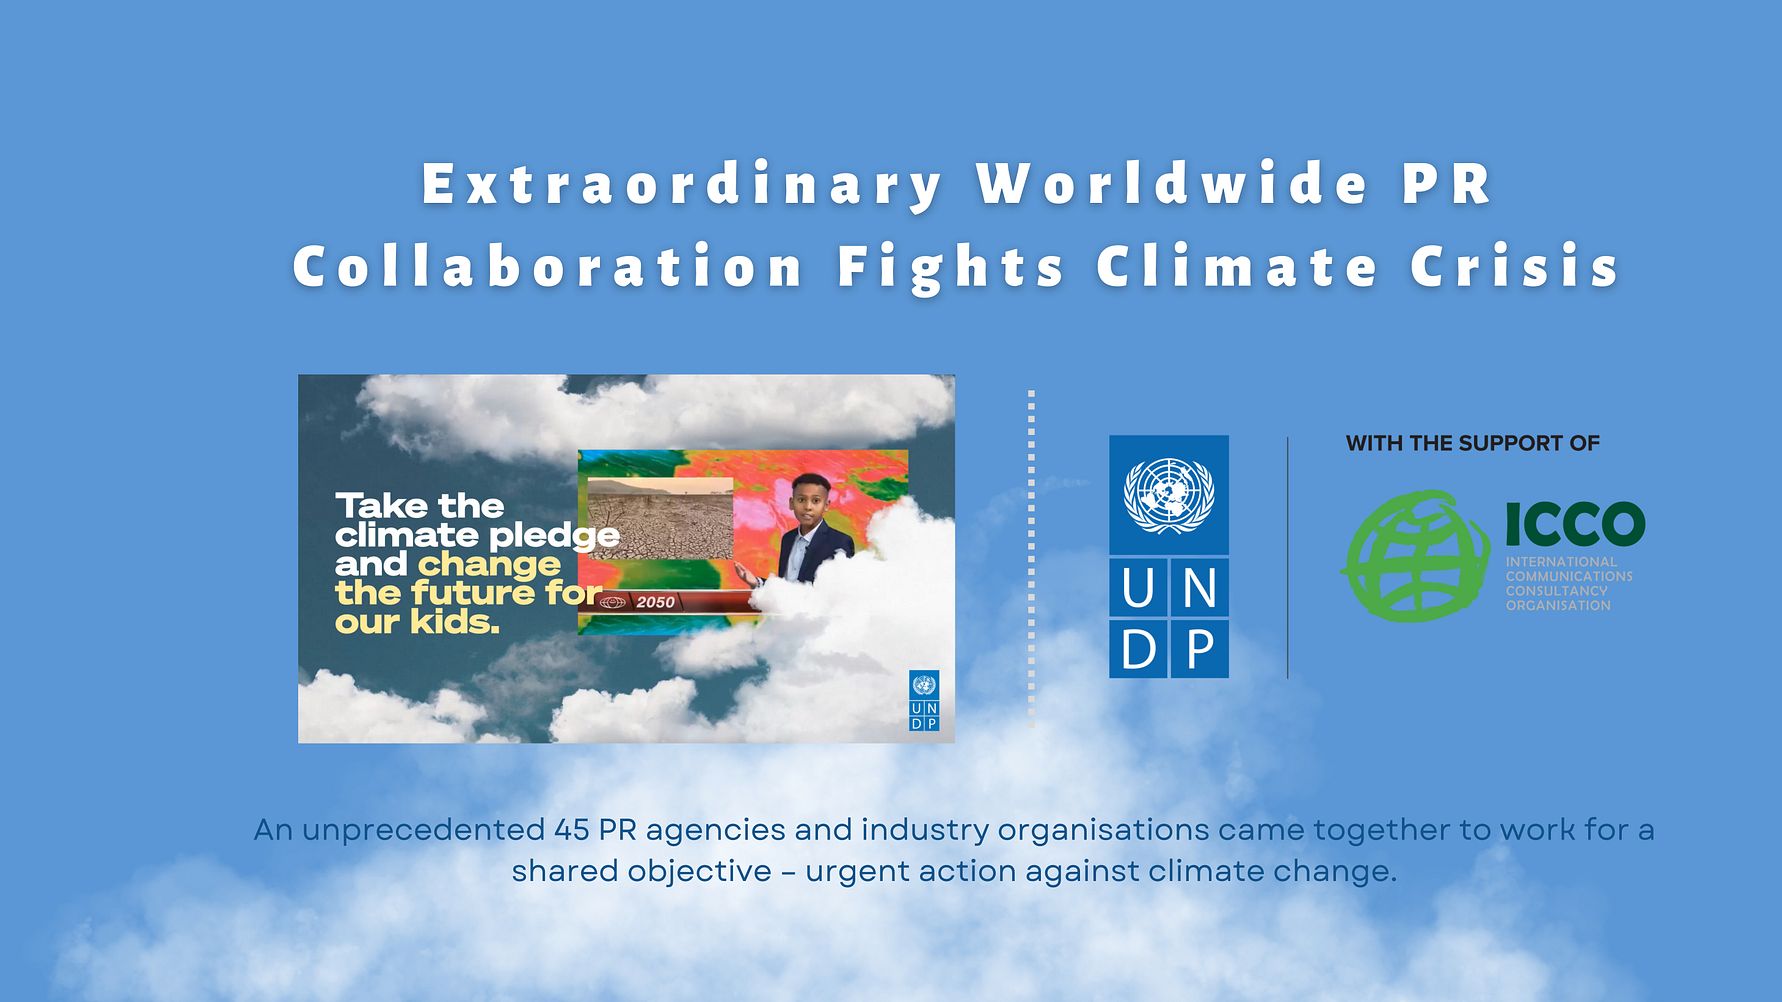 Extraordinary Worldwide PR Collaboration Fights Climate Crisis